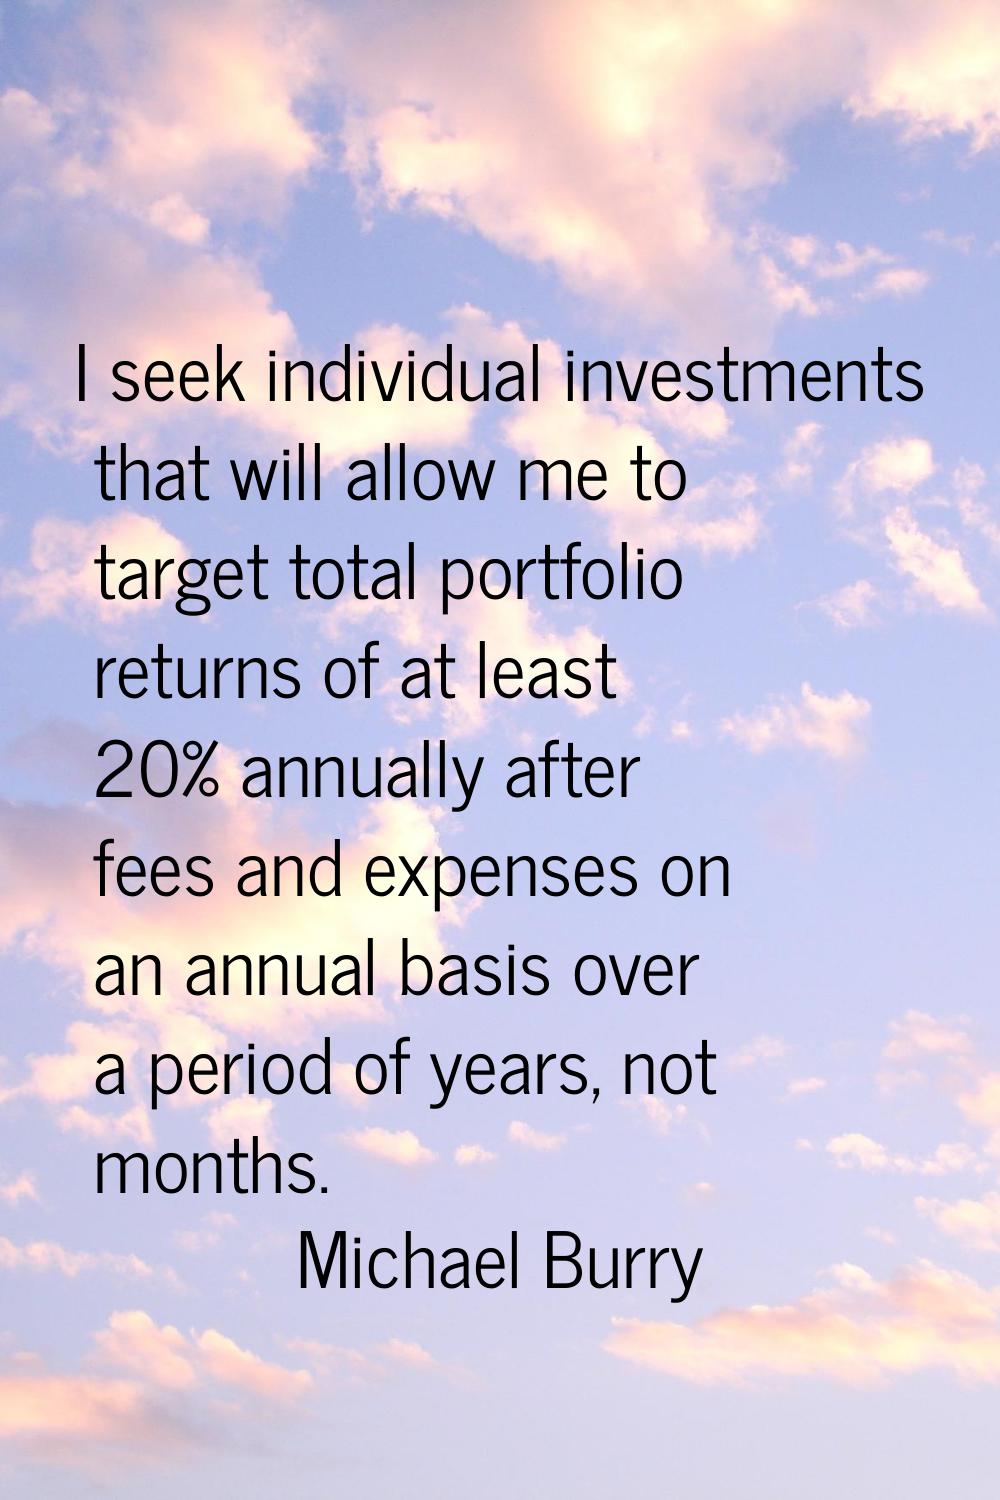 I seek individual investments that will allow me to target total portfolio returns of at least 20% 